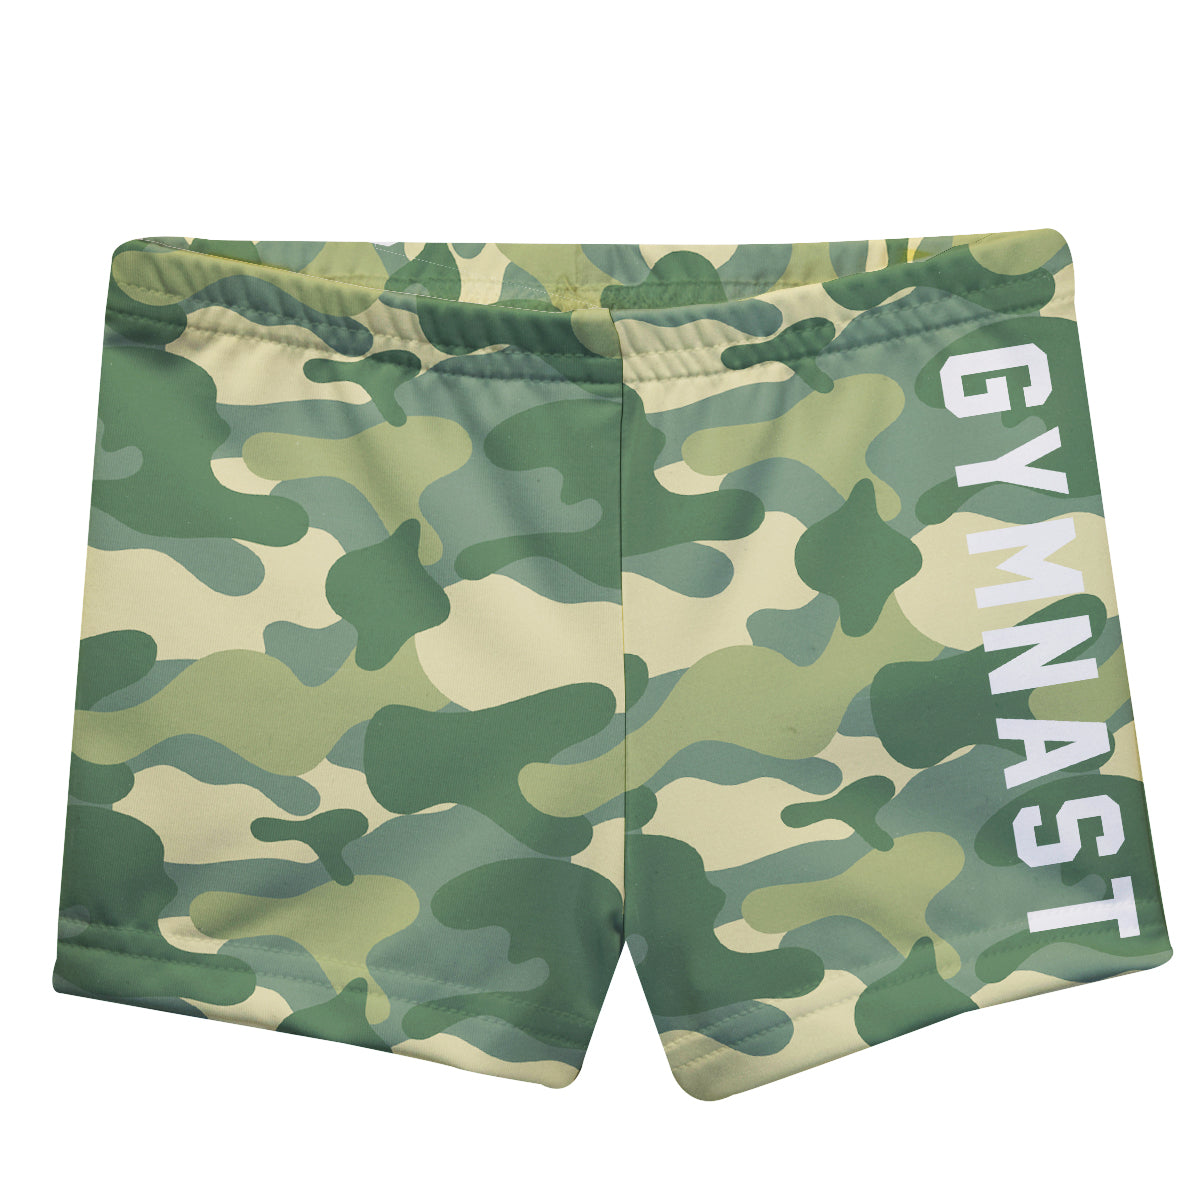 Gymnast Green Camuflage Shorties - Wimziy&Co.